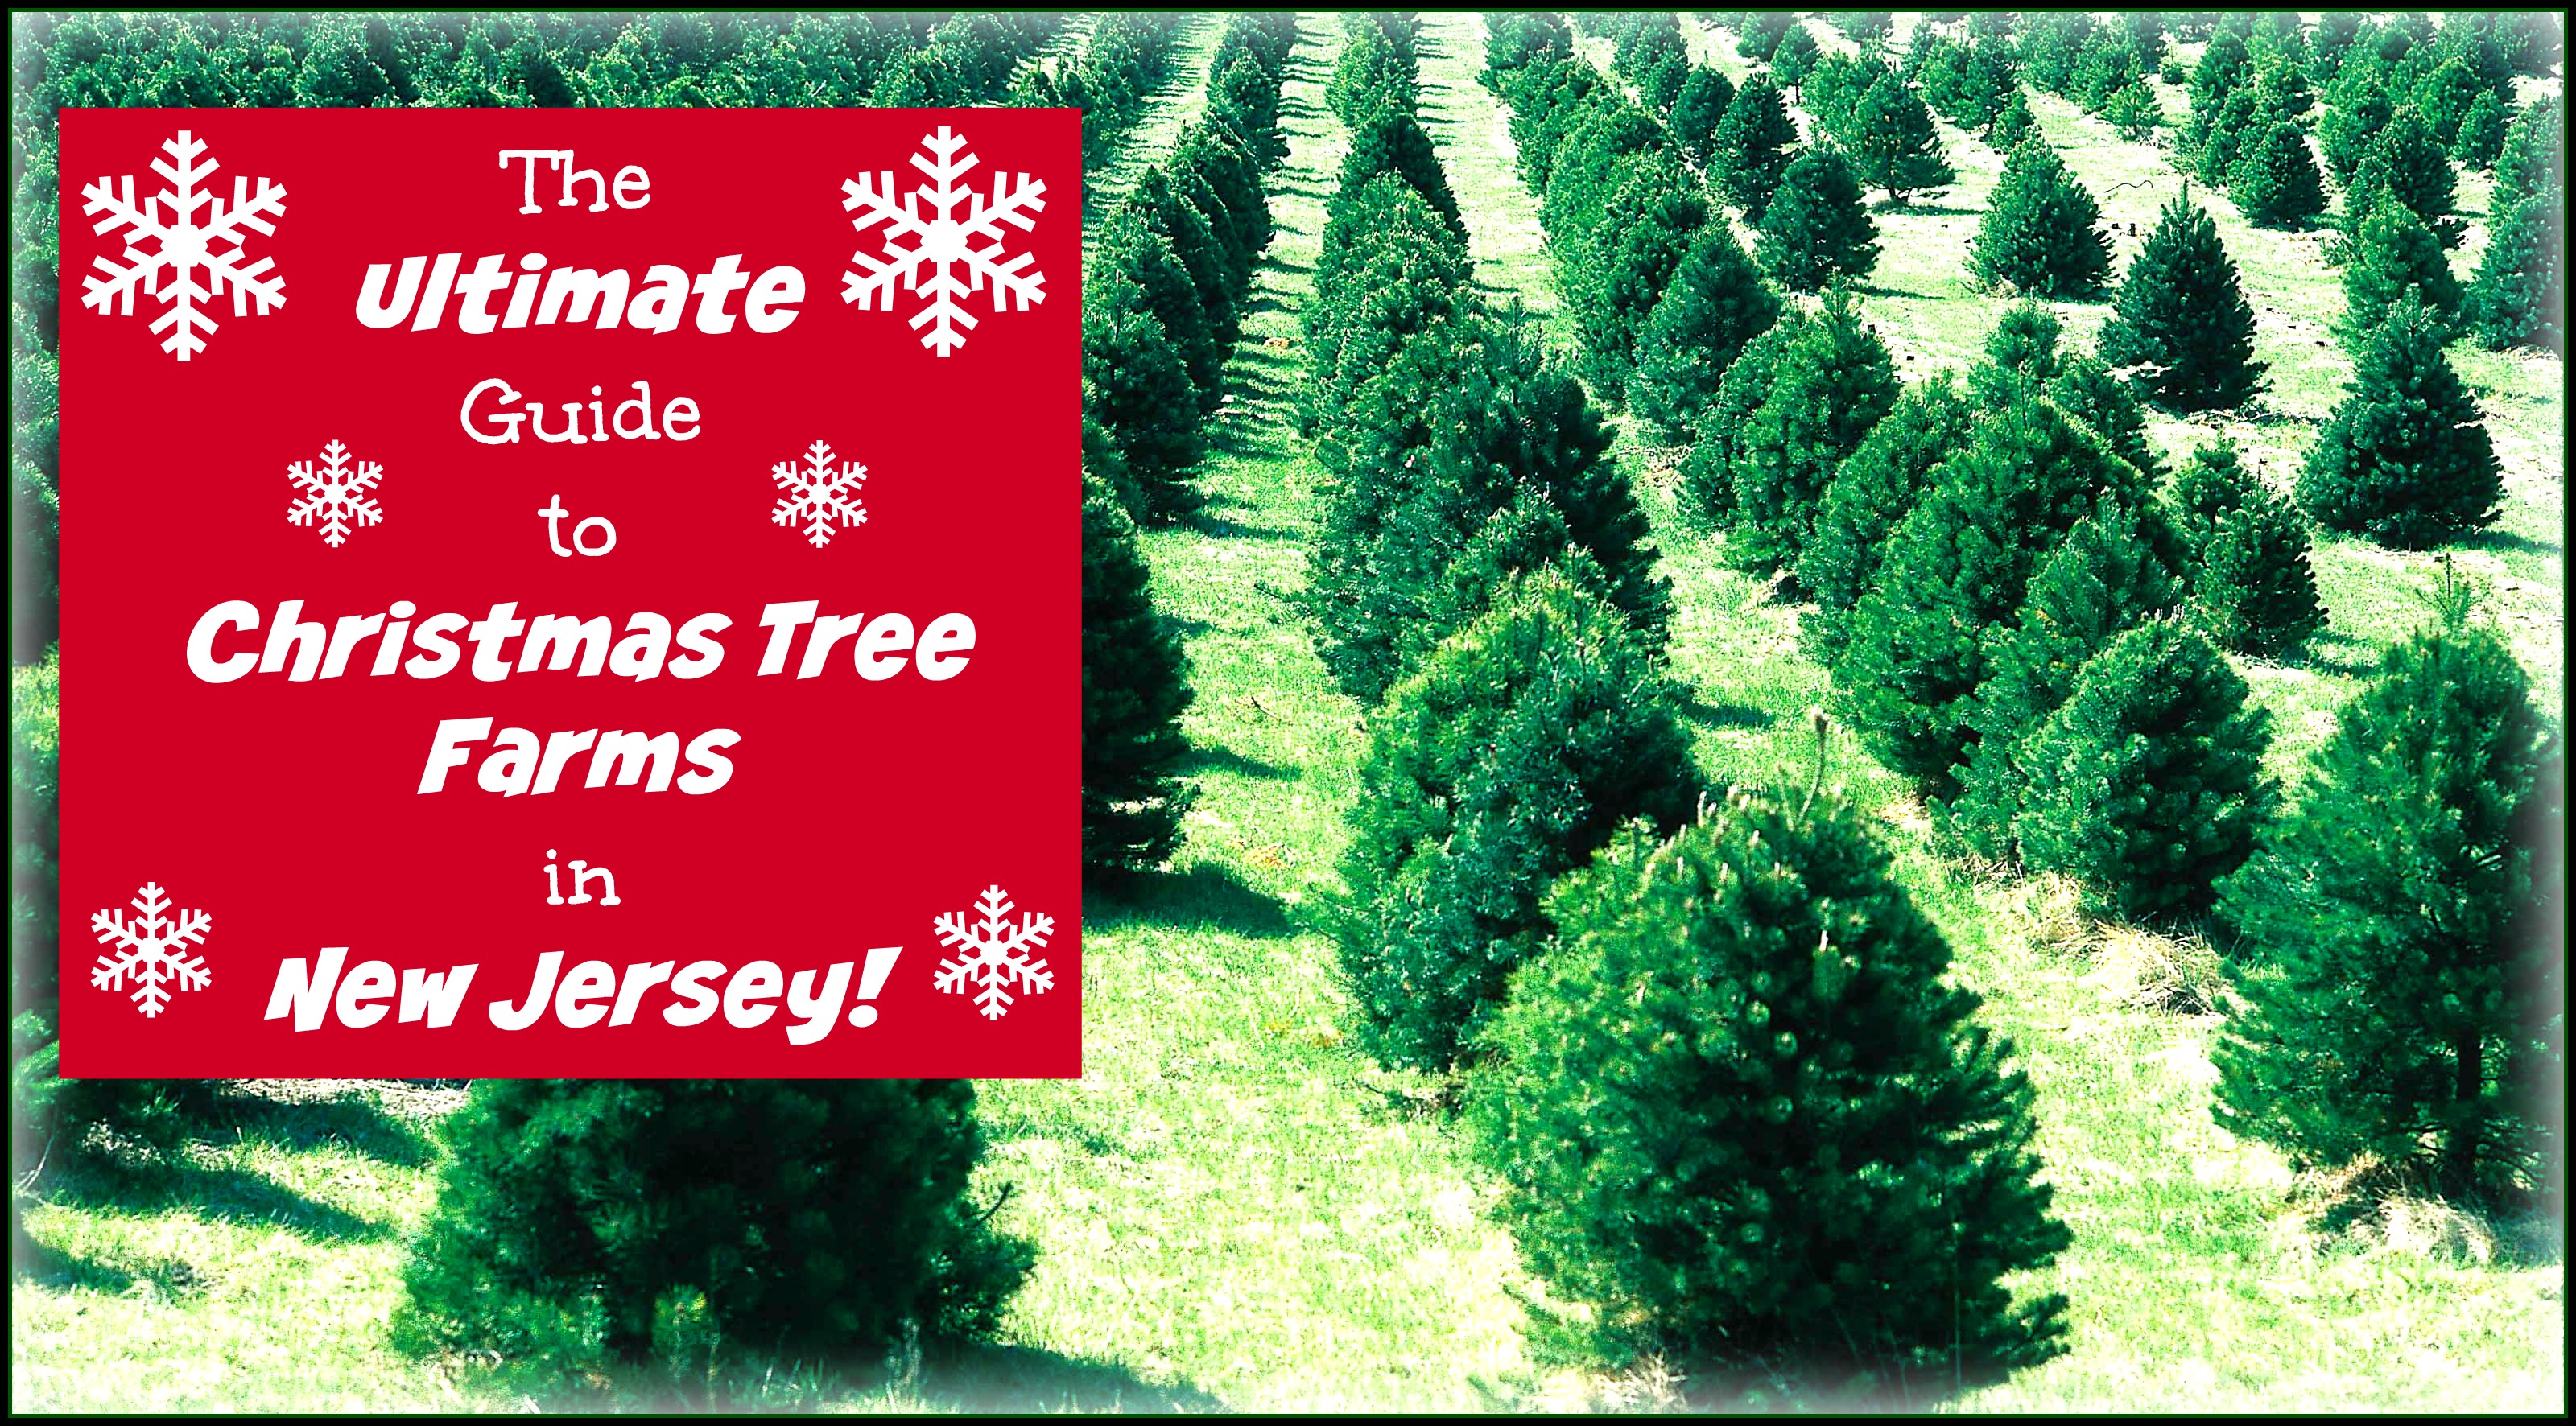 The Ultimate Guide to Christmas Tree Farms in New Jersey - Things to Do In New Jersey